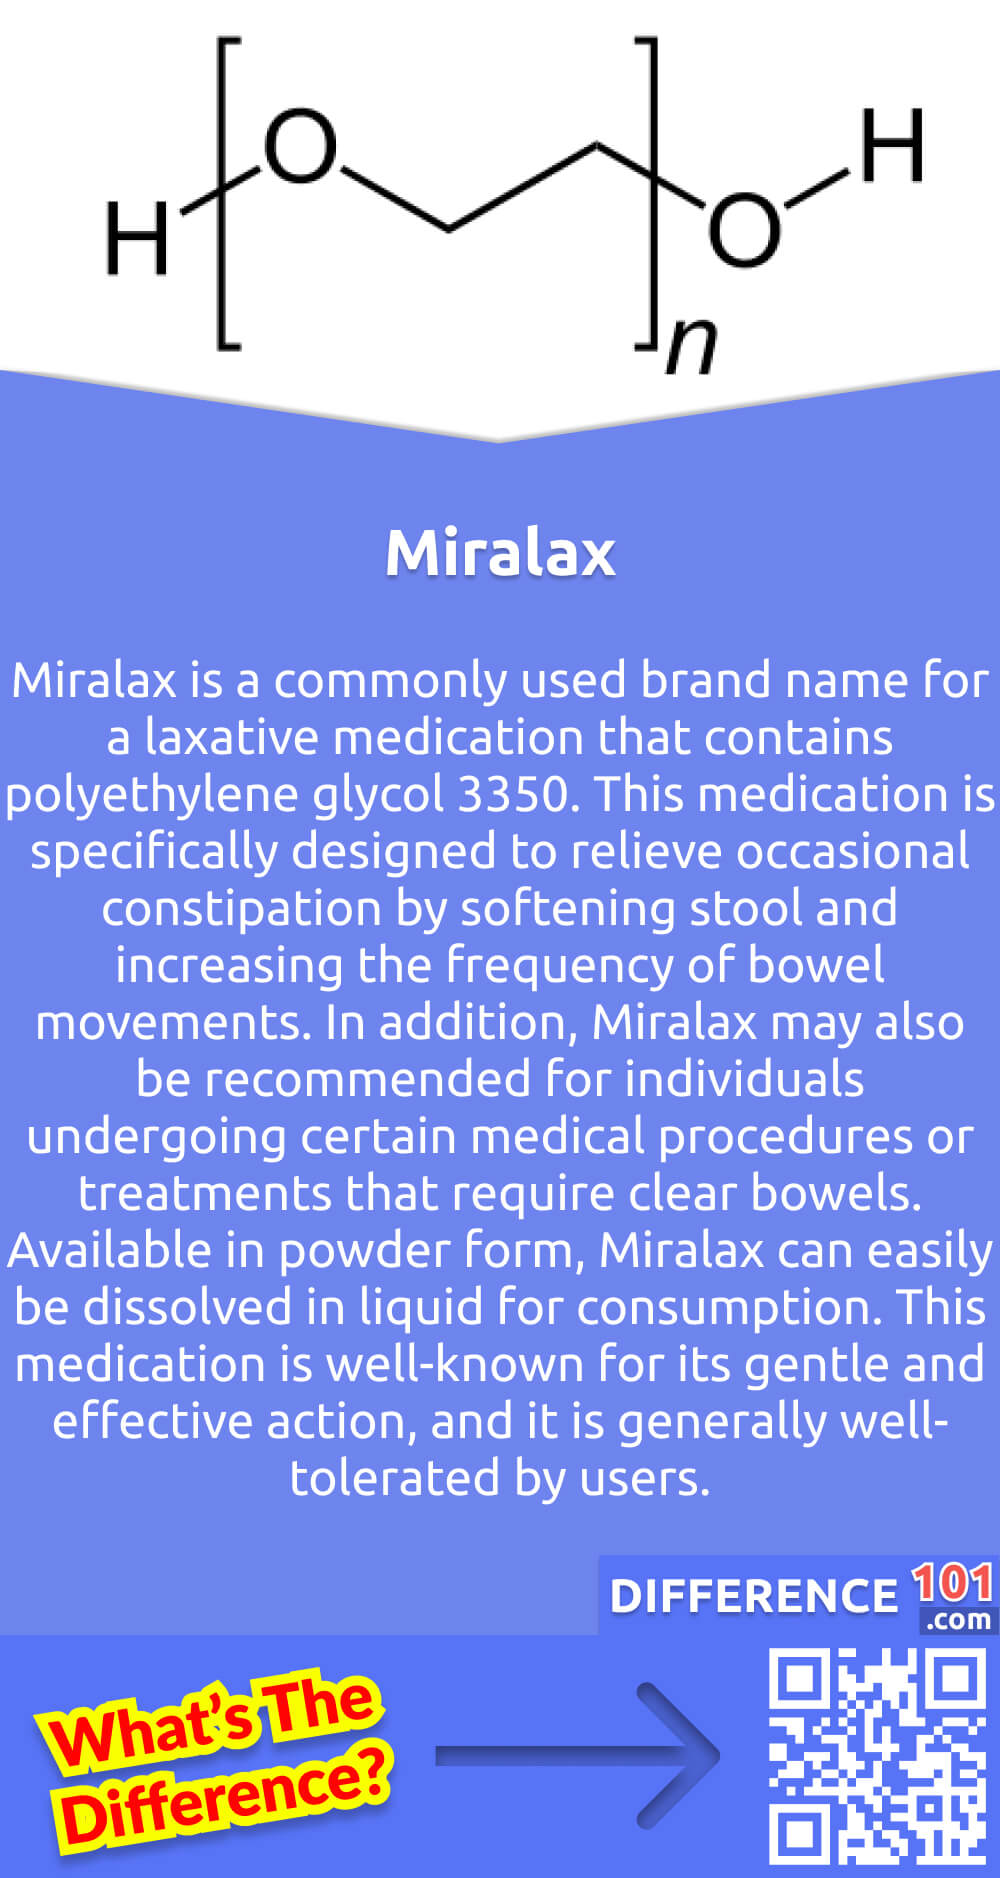 What Is Miralax? Miralax is a commonly used brand name for a laxative medication that contains polyethylene glycol 3350. This medication is specifically designed to relieve occasional constipation by softening stool and increasing the frequency of bowel movements. In addition, Miralax may also be recommended for individuals undergoing certain medical procedures or treatments that require clear bowels. Available in powder form, Miralax can easily be dissolved in liquid for consumption. This medication is well-known for its gentle and effective action, and it is generally well-tolerated by users. However, it is crucial to follow the instructions provided by a healthcare provider or on the packaging when using Miralax.